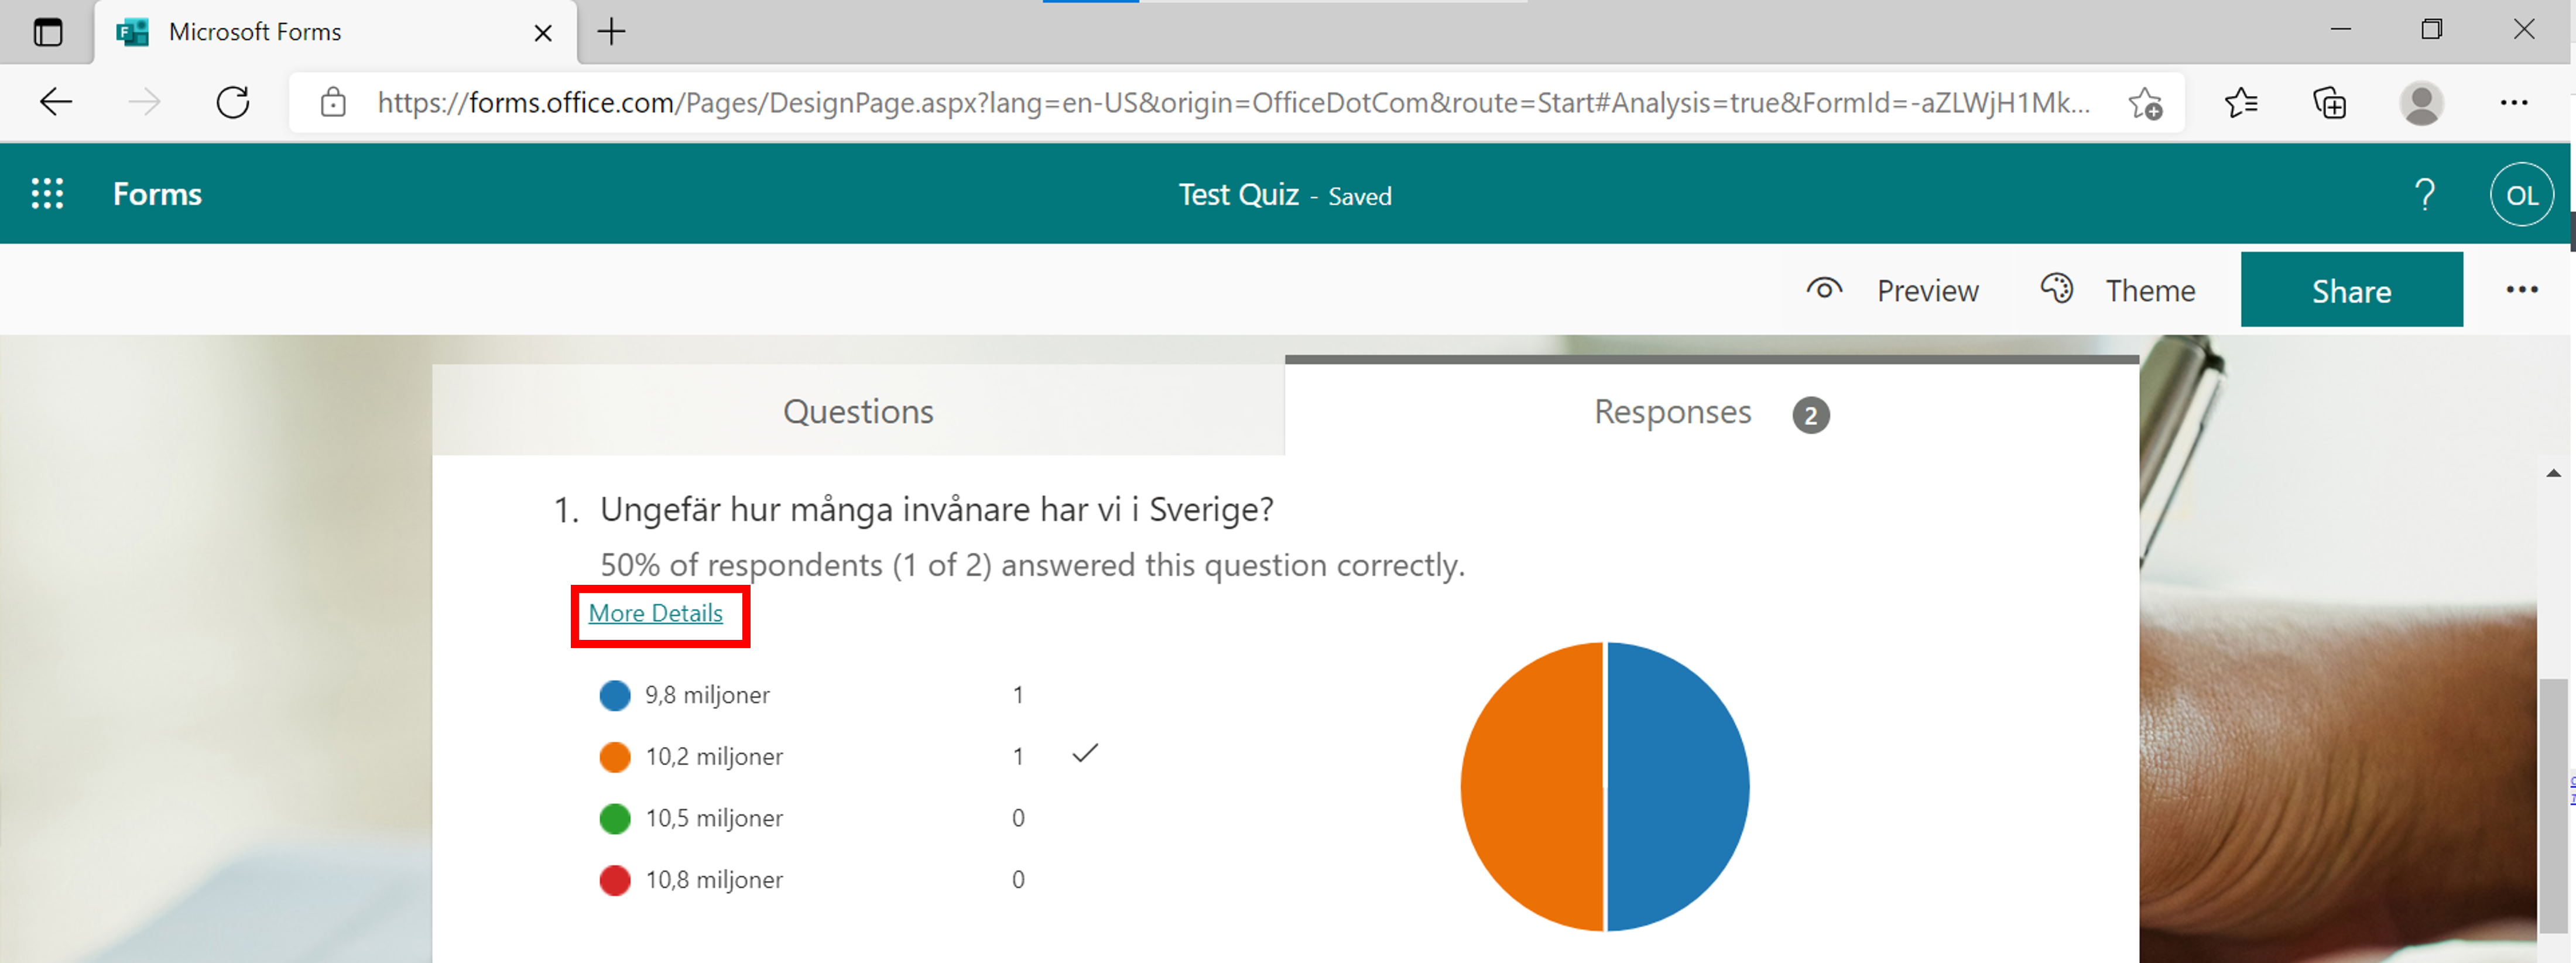 review results in a questionnare - answer file